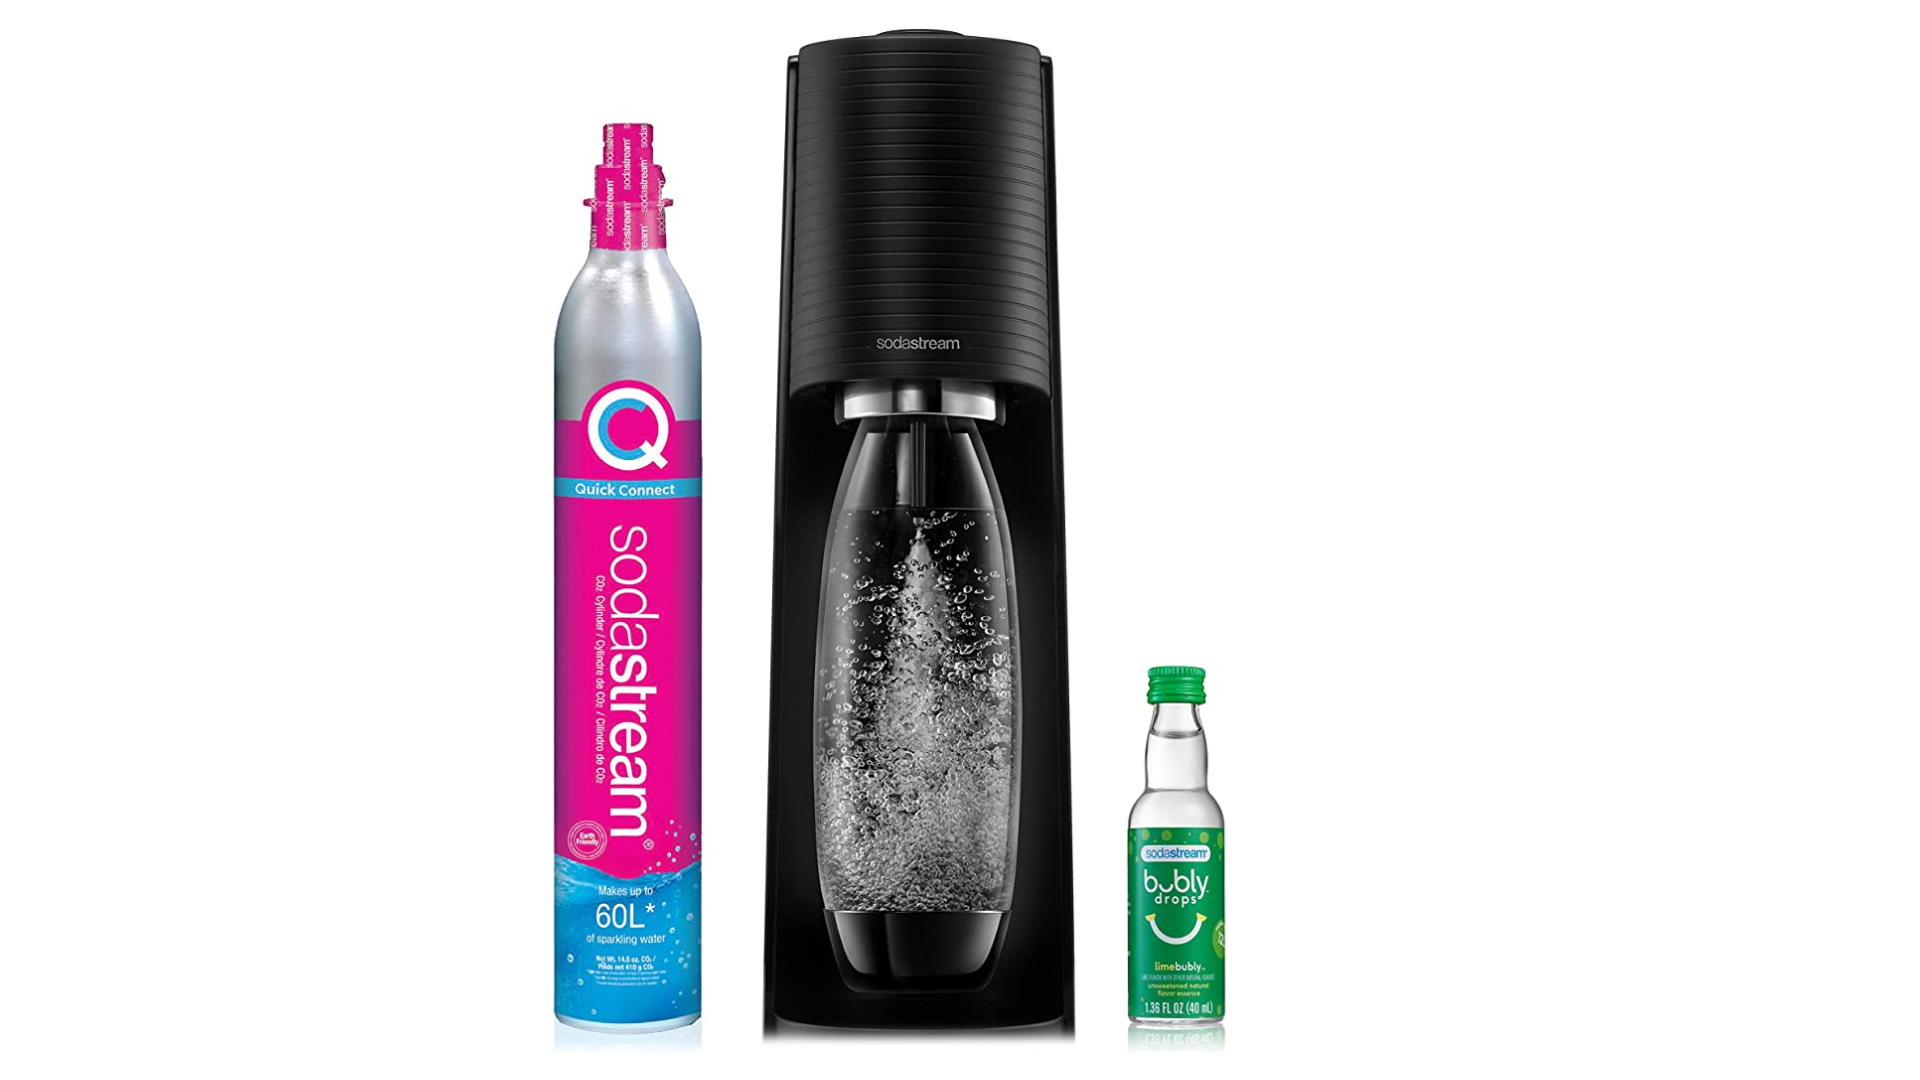 soda stream that creates fizzy water at a touch of a button